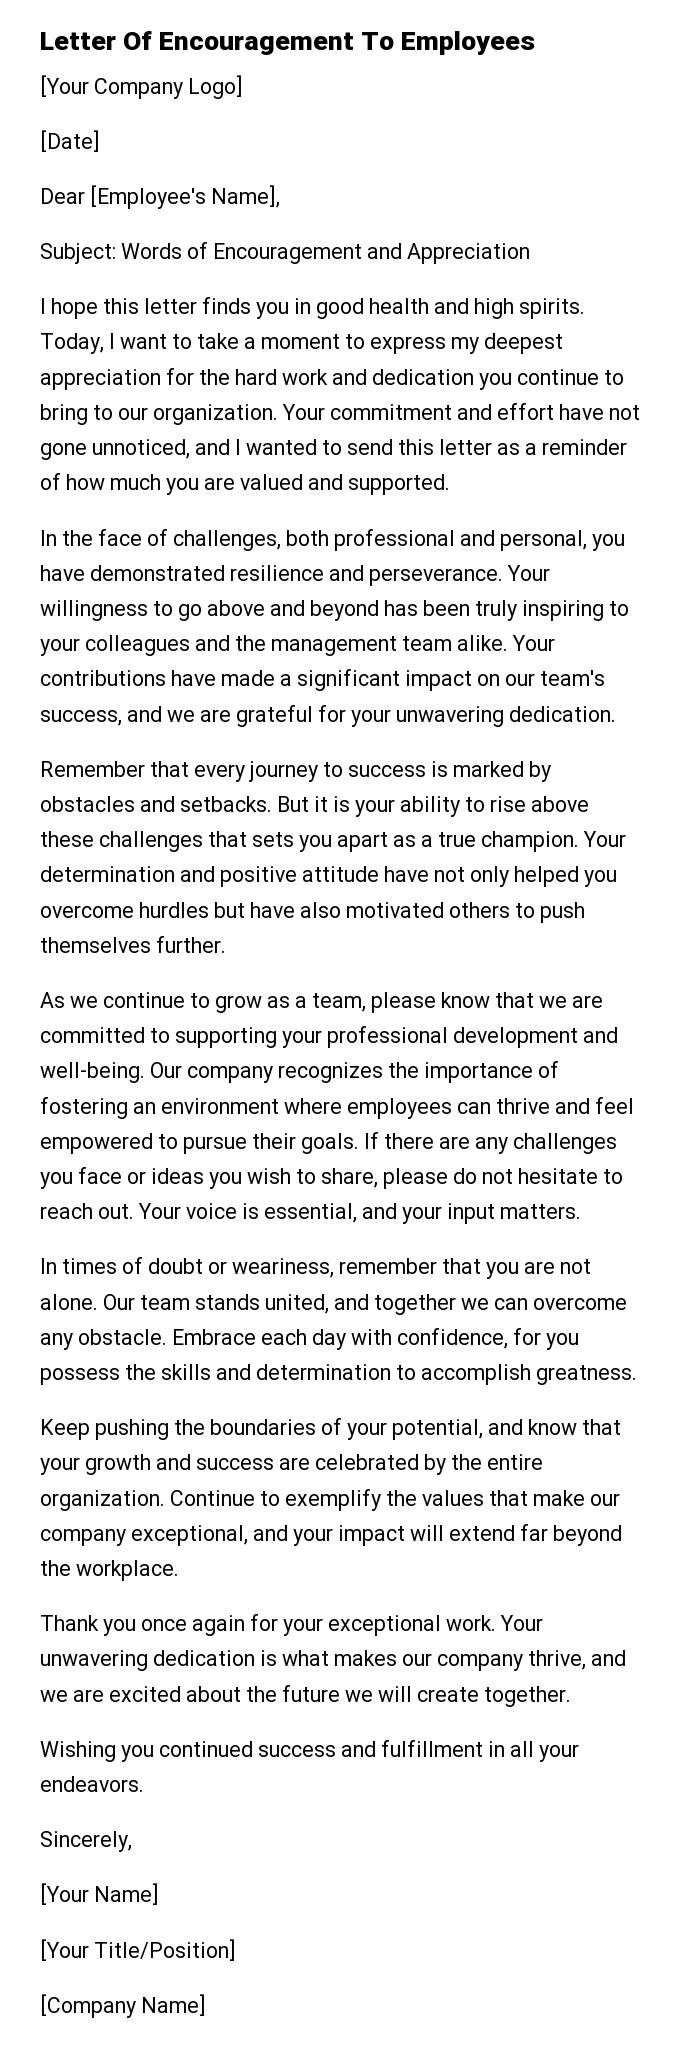 Letter Of Encouragement To Employees